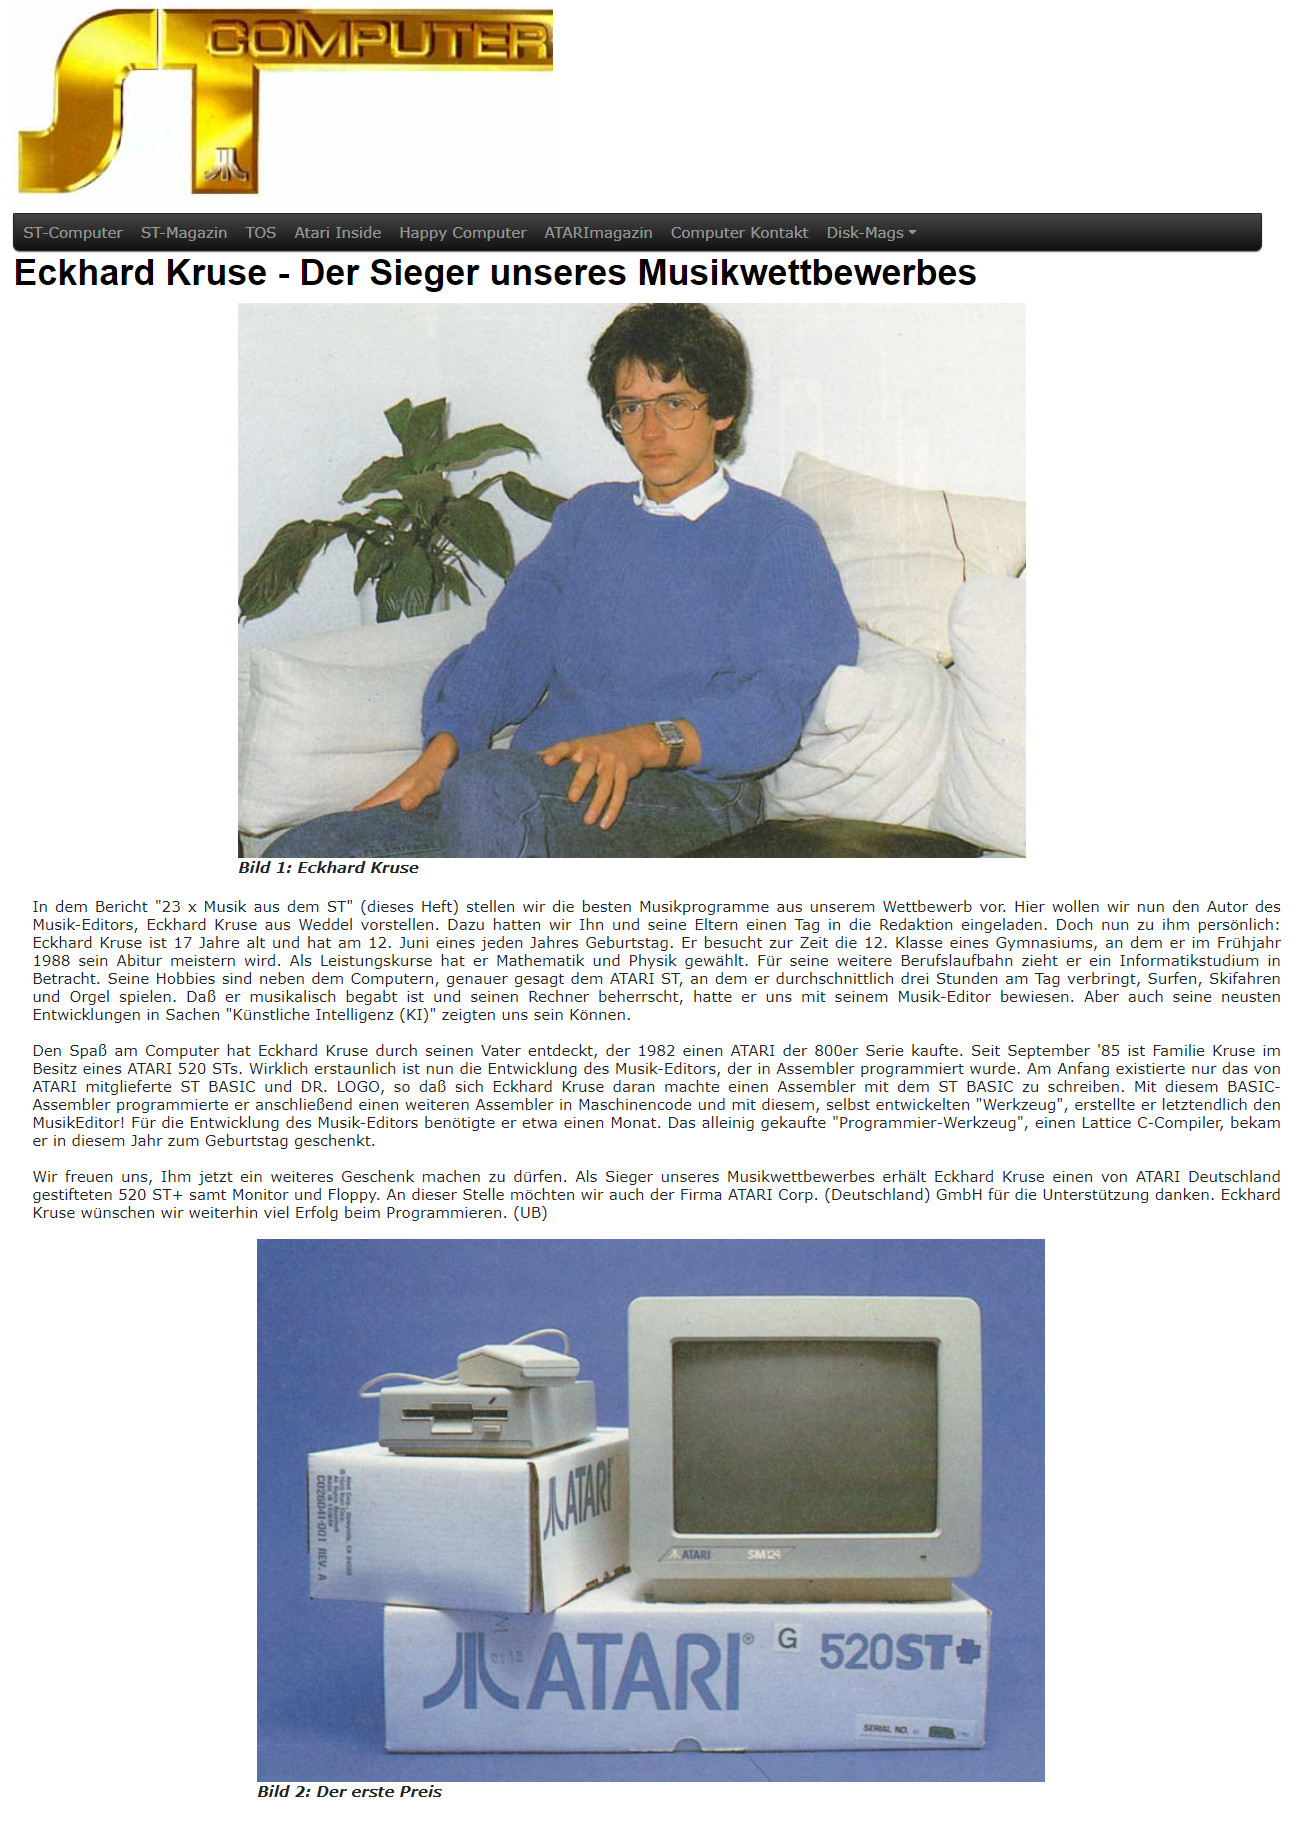 Eckhart won 1st prize in the music competition of the German ST Computer Magazin.